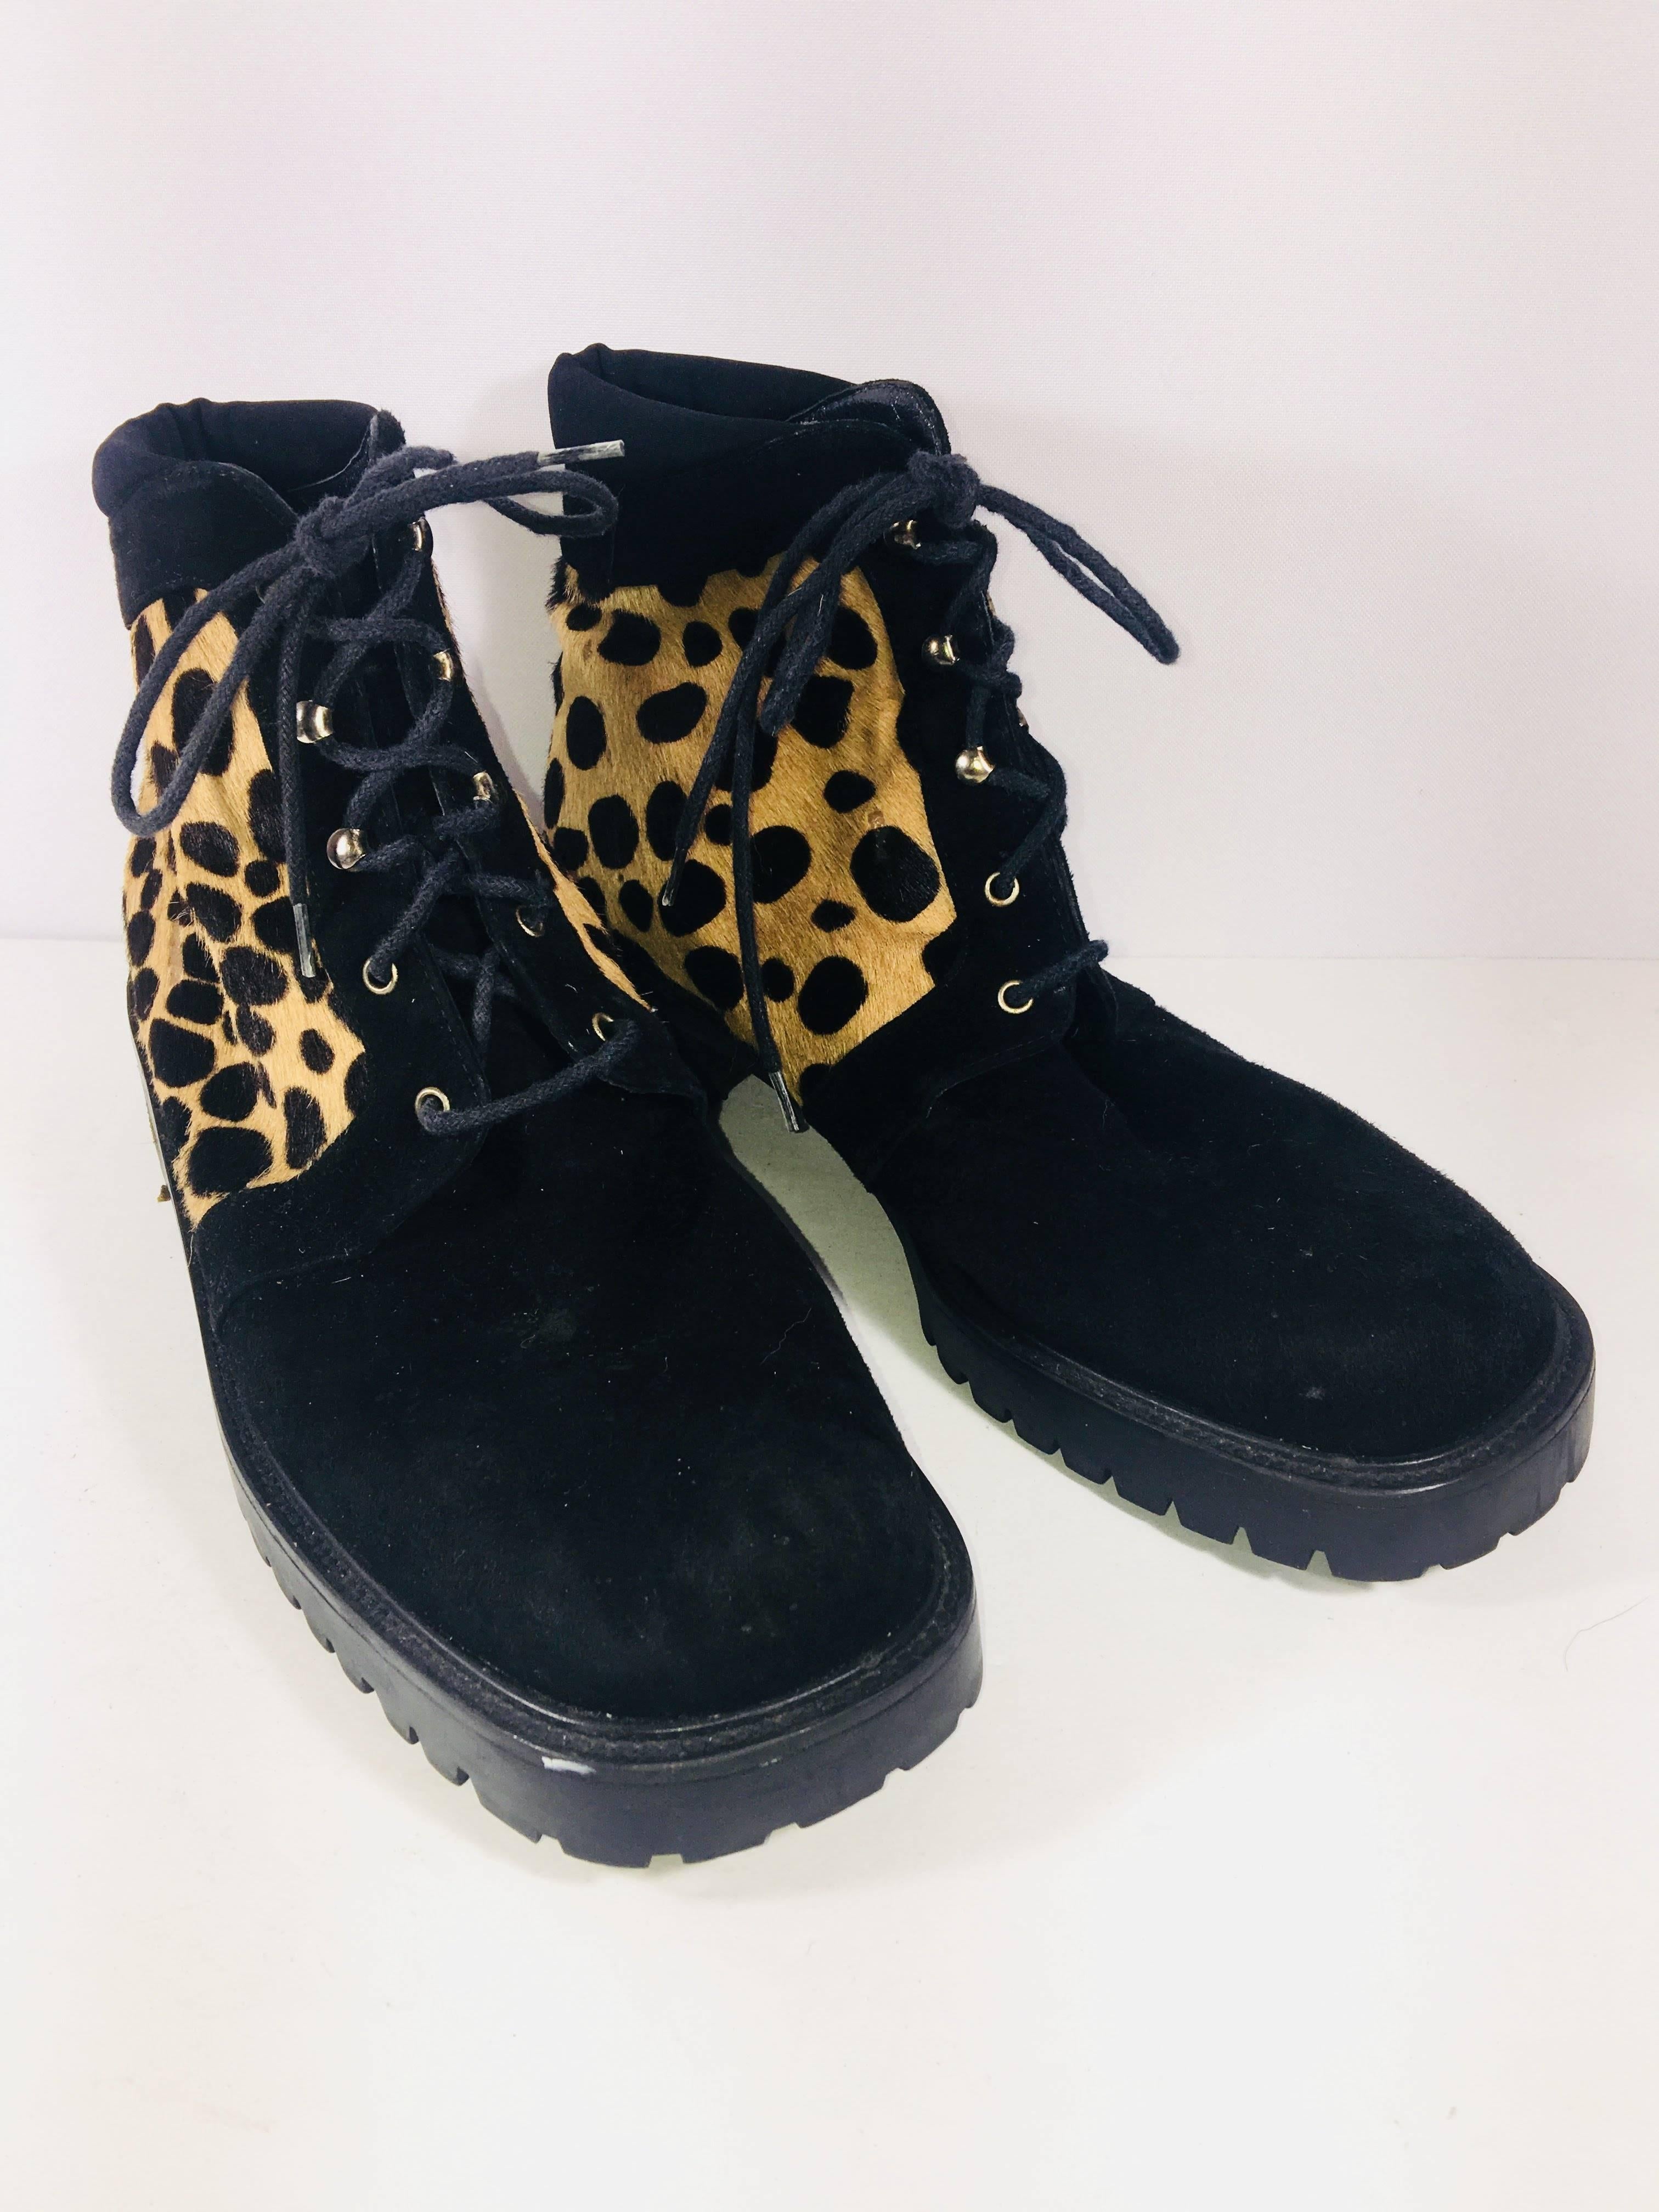 Stuart Weitzman Cheetah Print Ankle Boots in Black Suede with Cheetah Print Panels. Lace up Front and Chunky Heel.